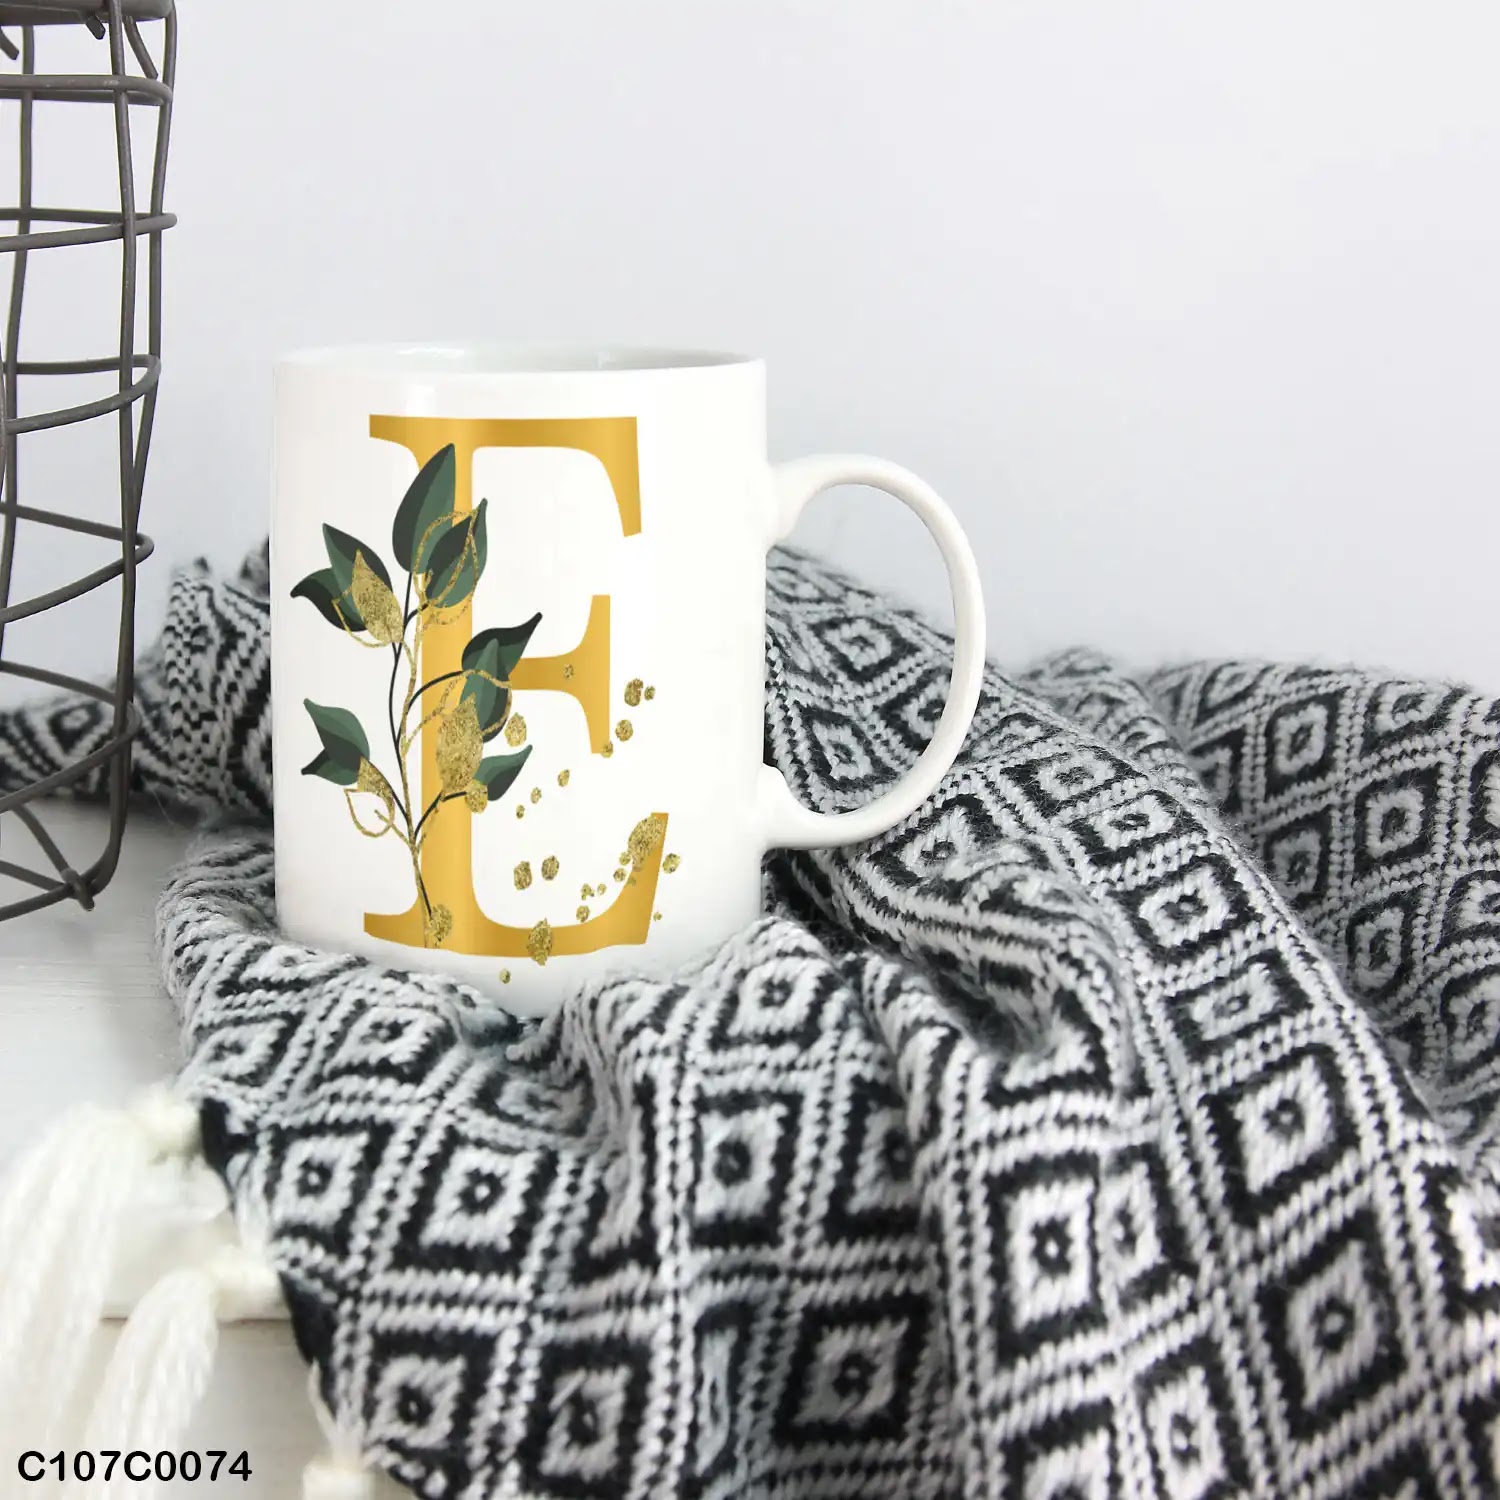 A white mug (cup) printed with gold Letter "E" and small green branch